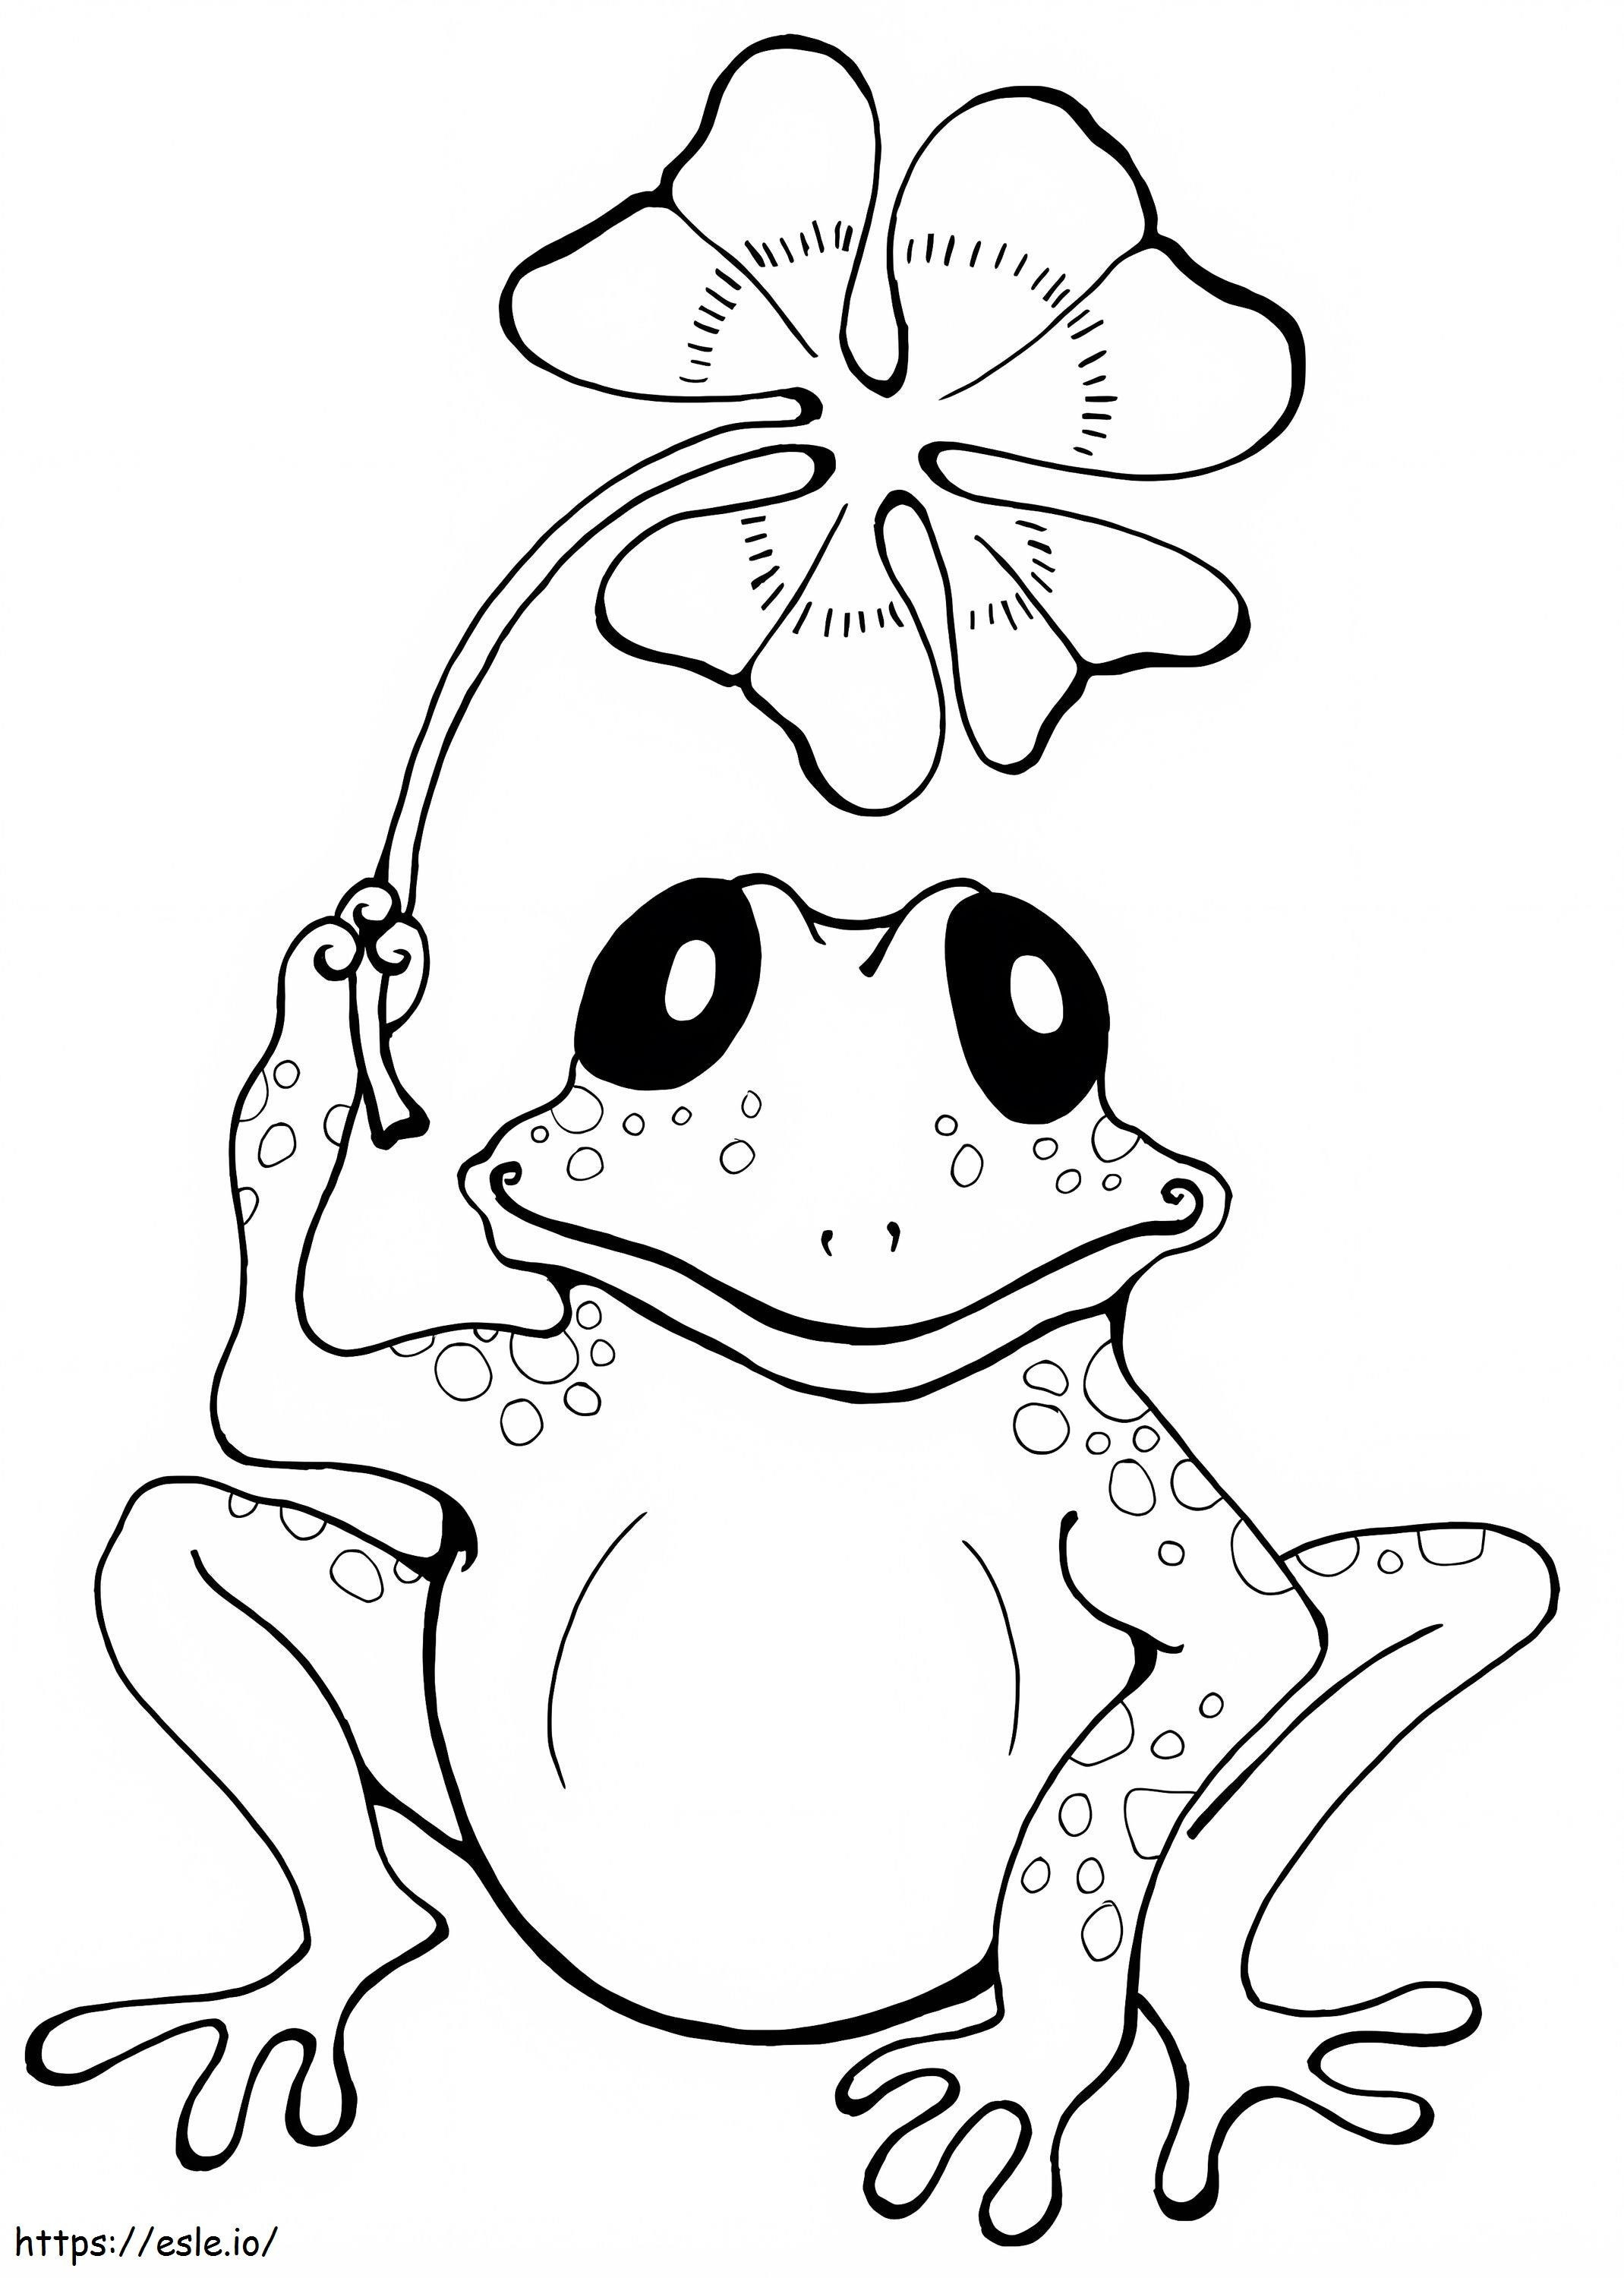 Frog With Four Leaf Clover coloring page